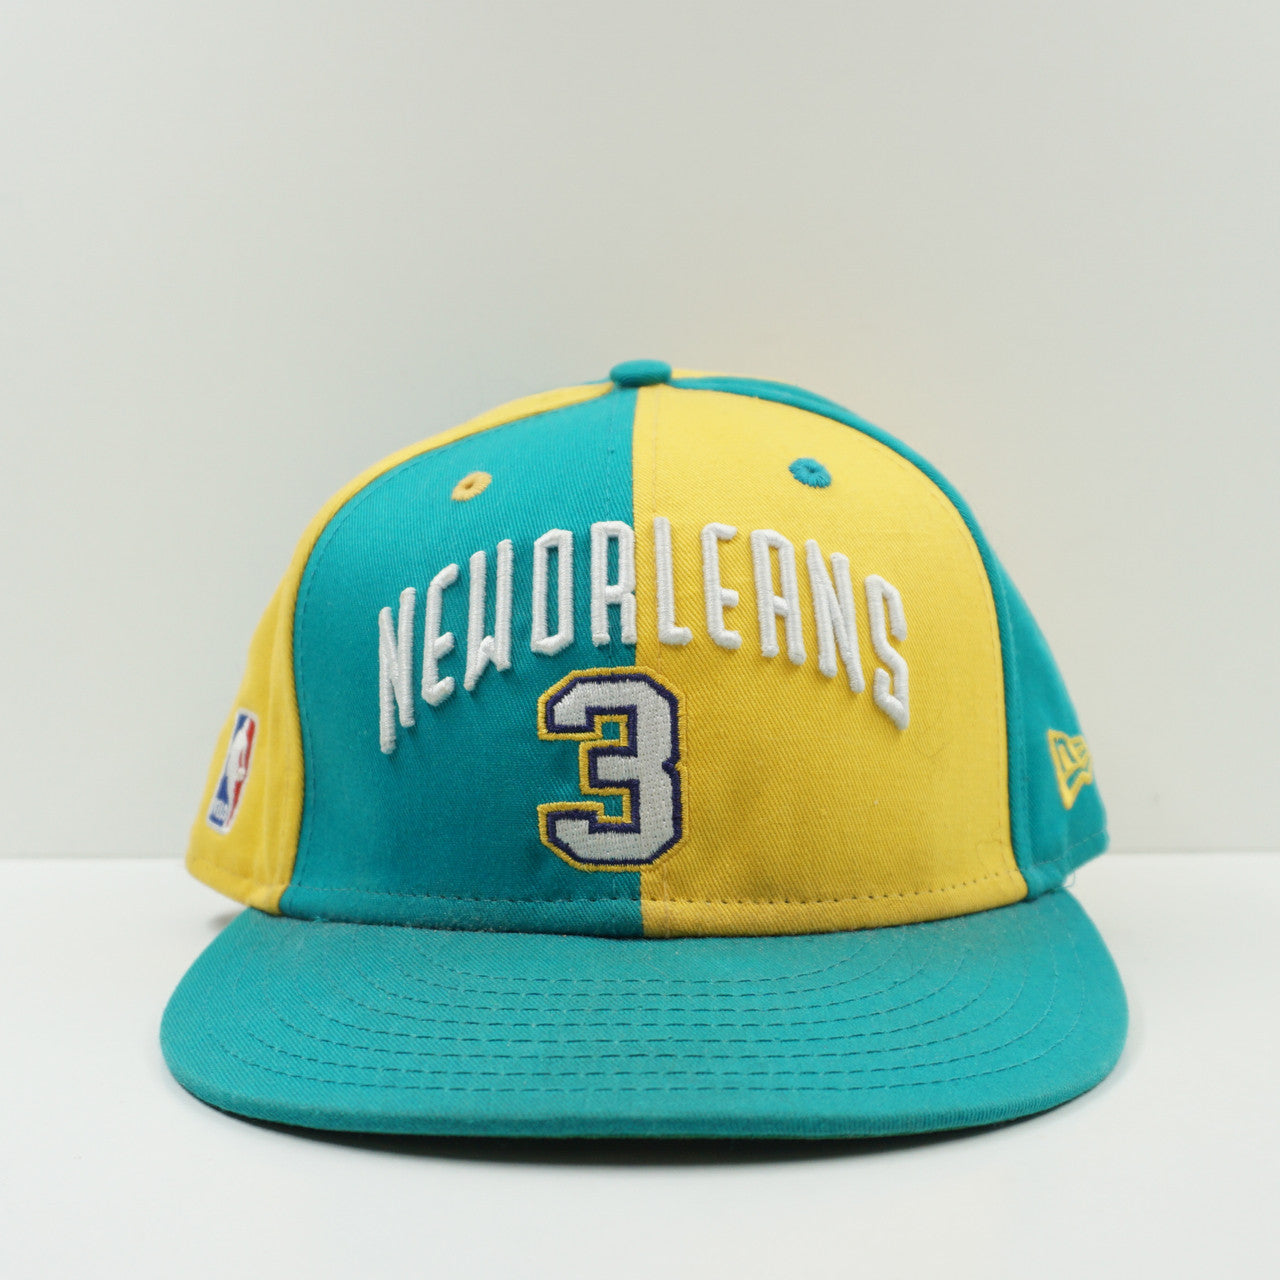 New Era New Orleans 3 Fitted Cap